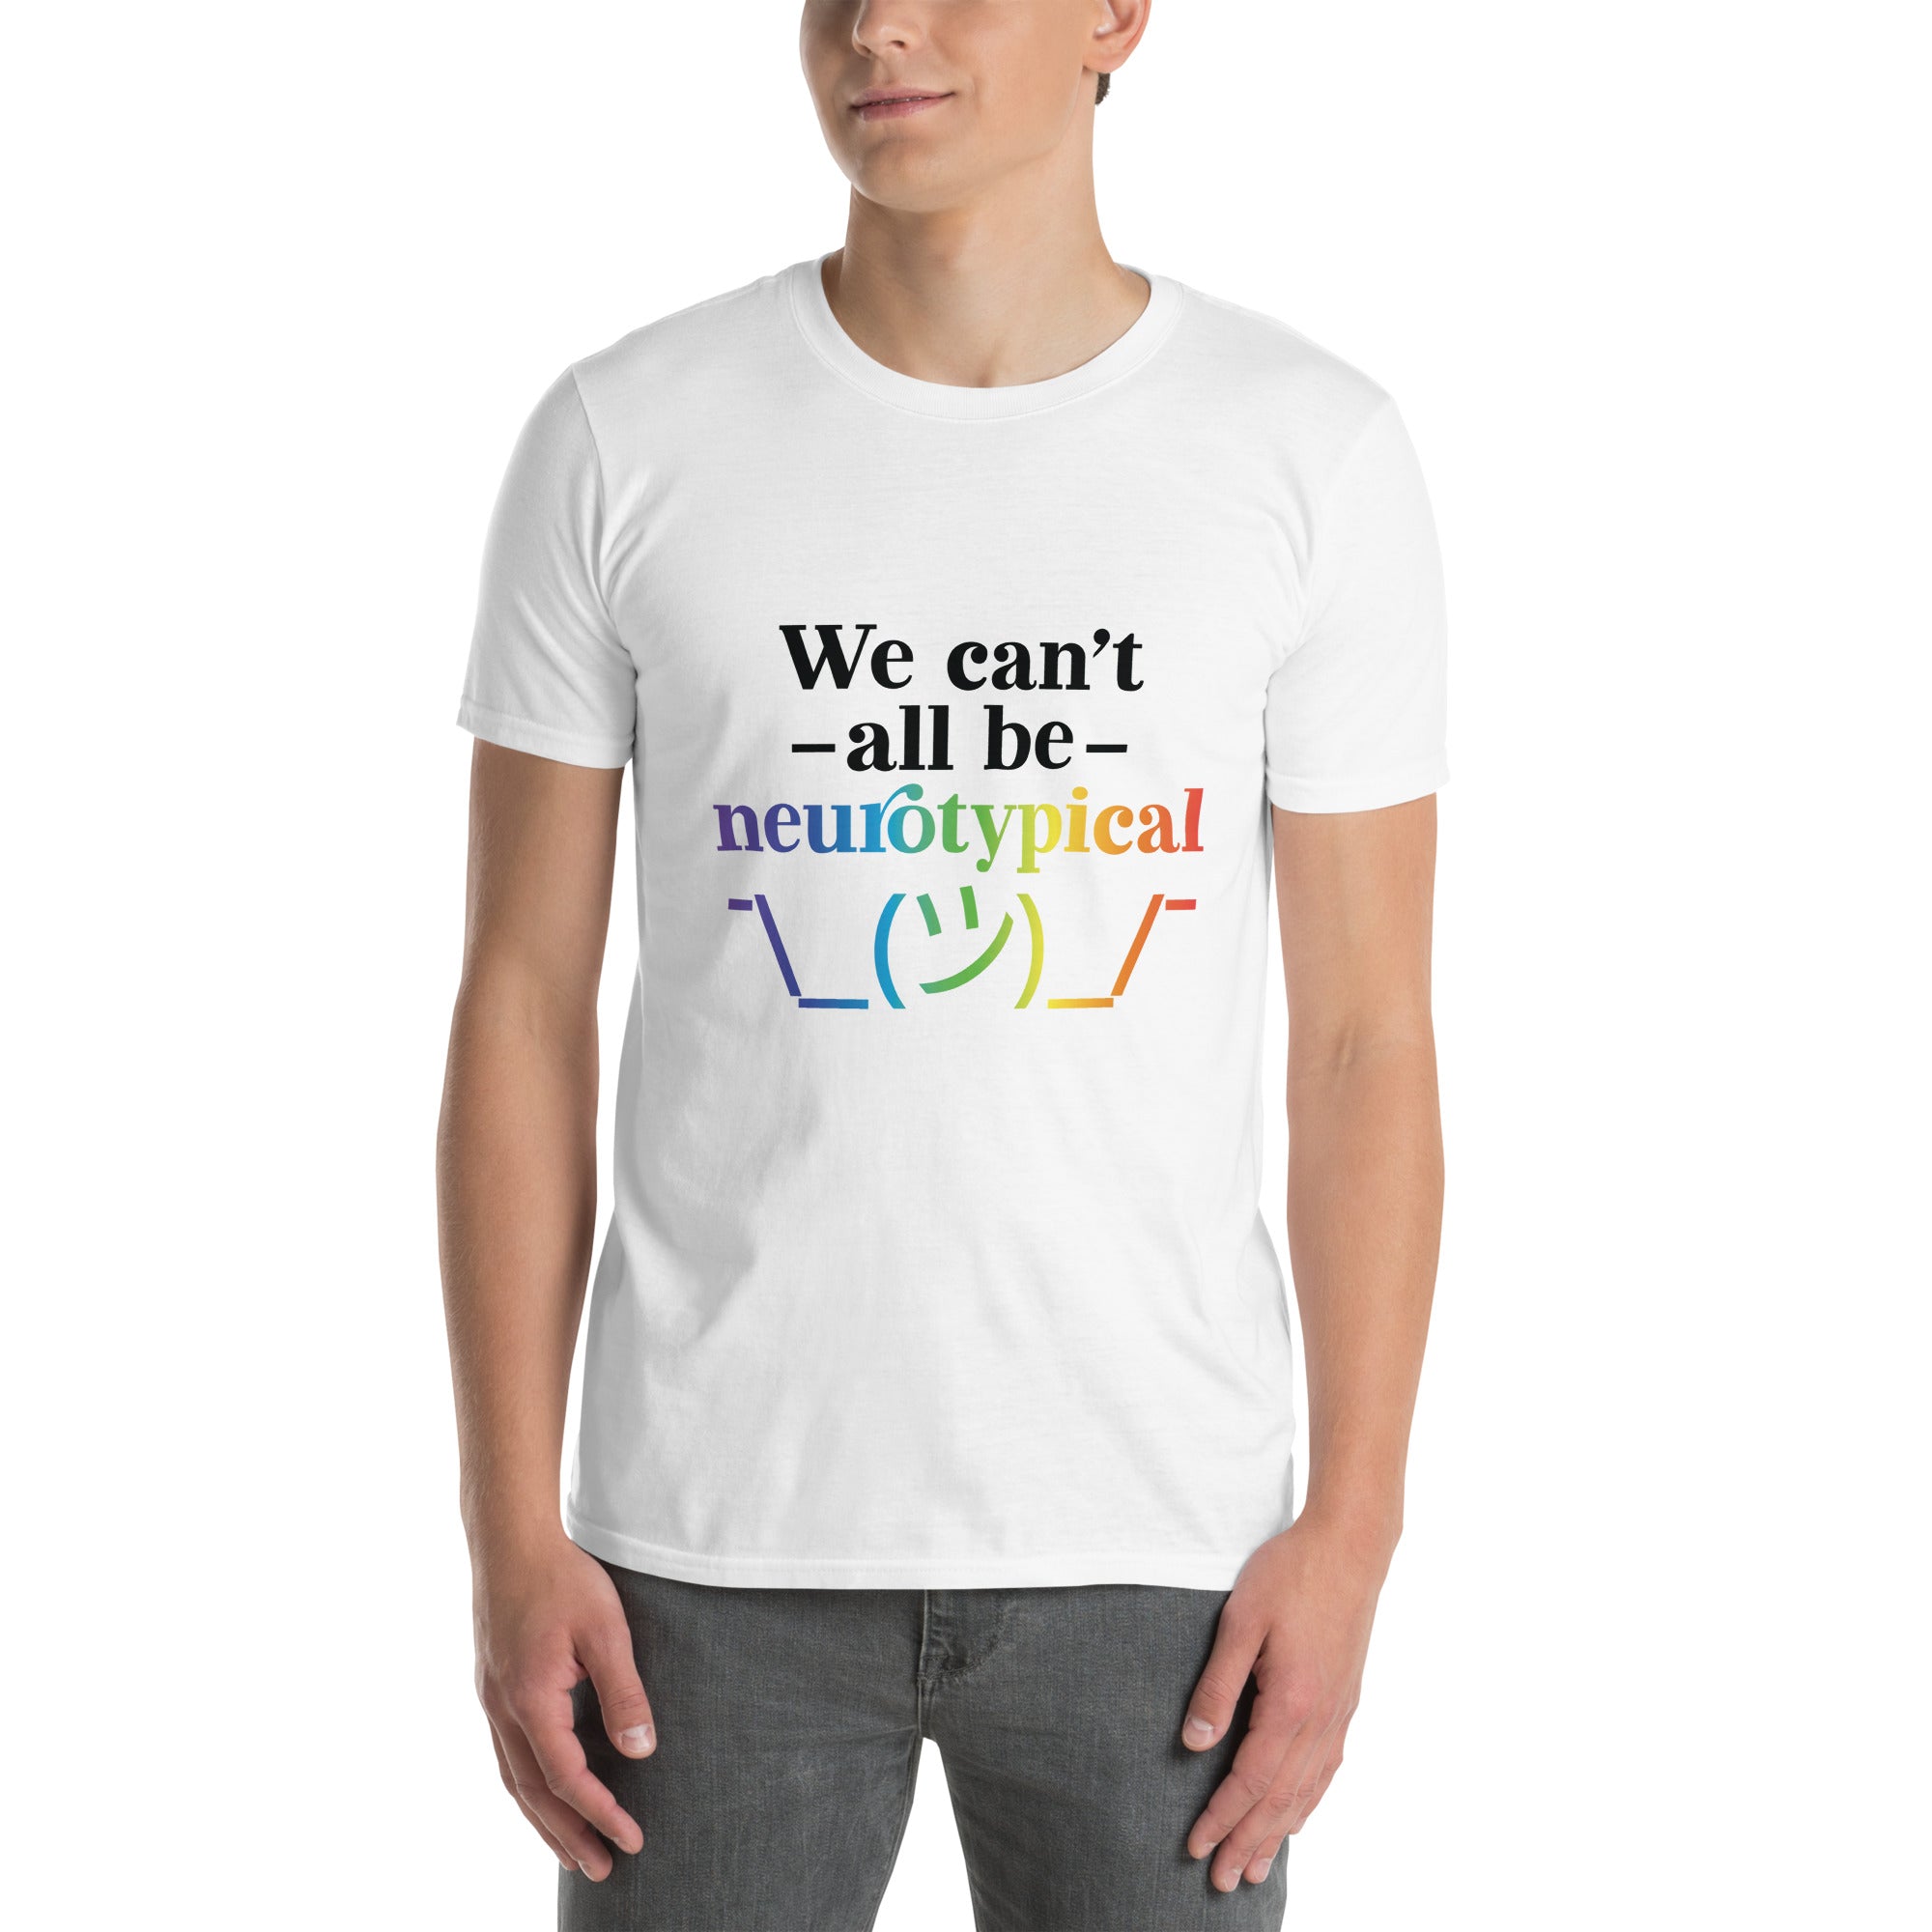 Short-Sleeve Unisex T-Shirt- ADHD- We Cant All Be Neurotypical